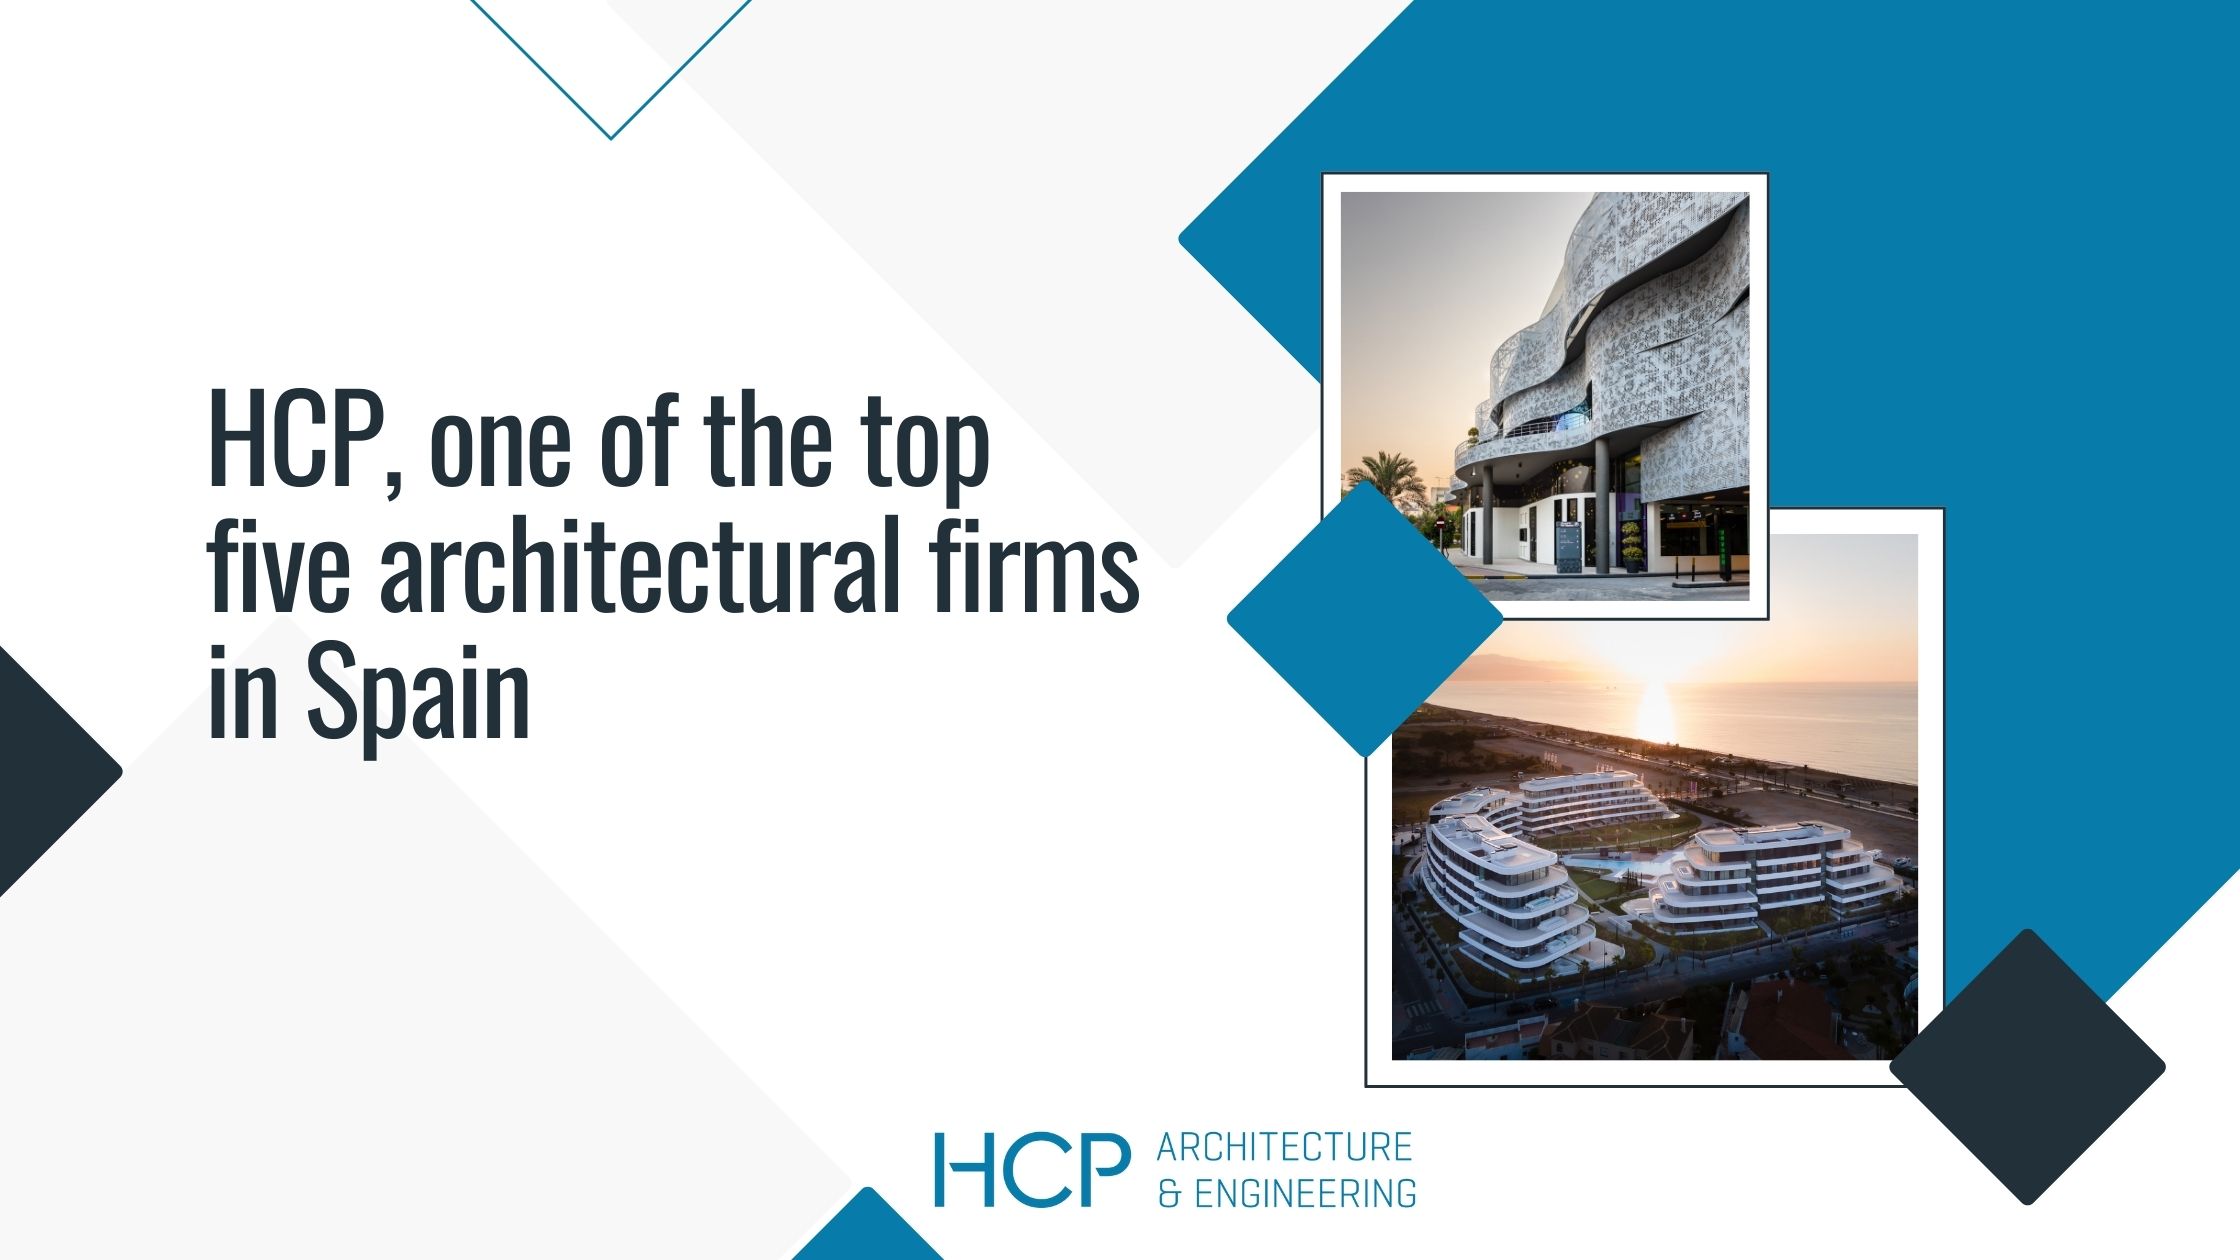 Malaga-based architecture firm HCP, among the top 5 architecture firms in Spain